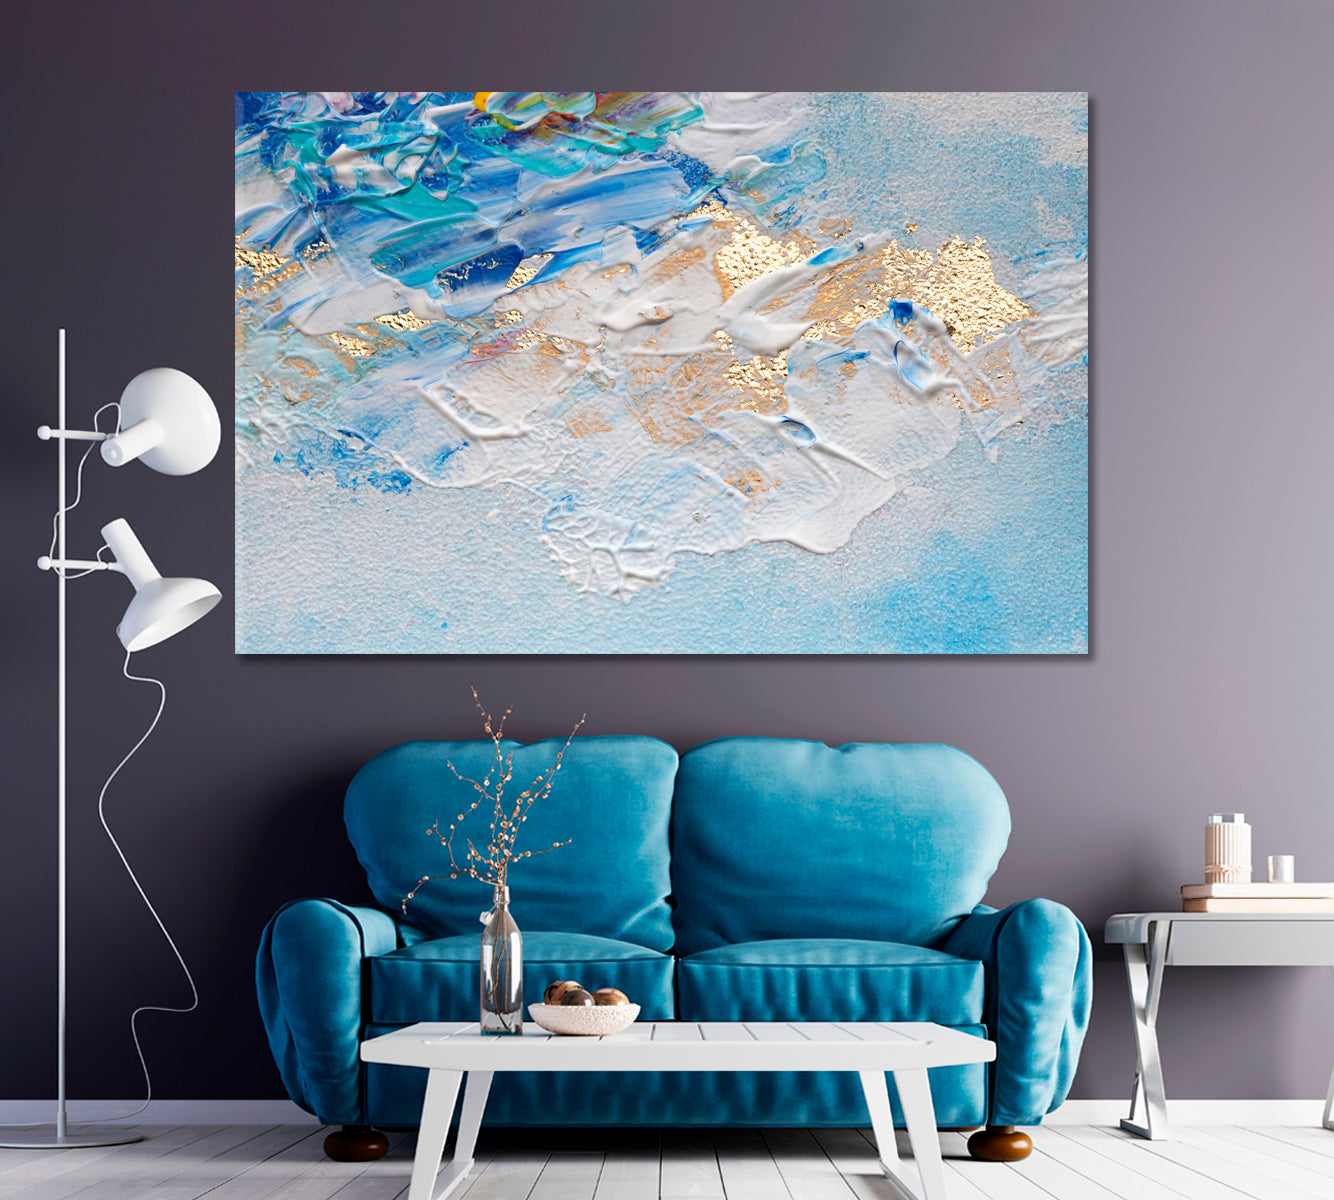 Creative Blue & Gold Painting Canvas Print ArtLexy 1 Panel 24"x16" inches 